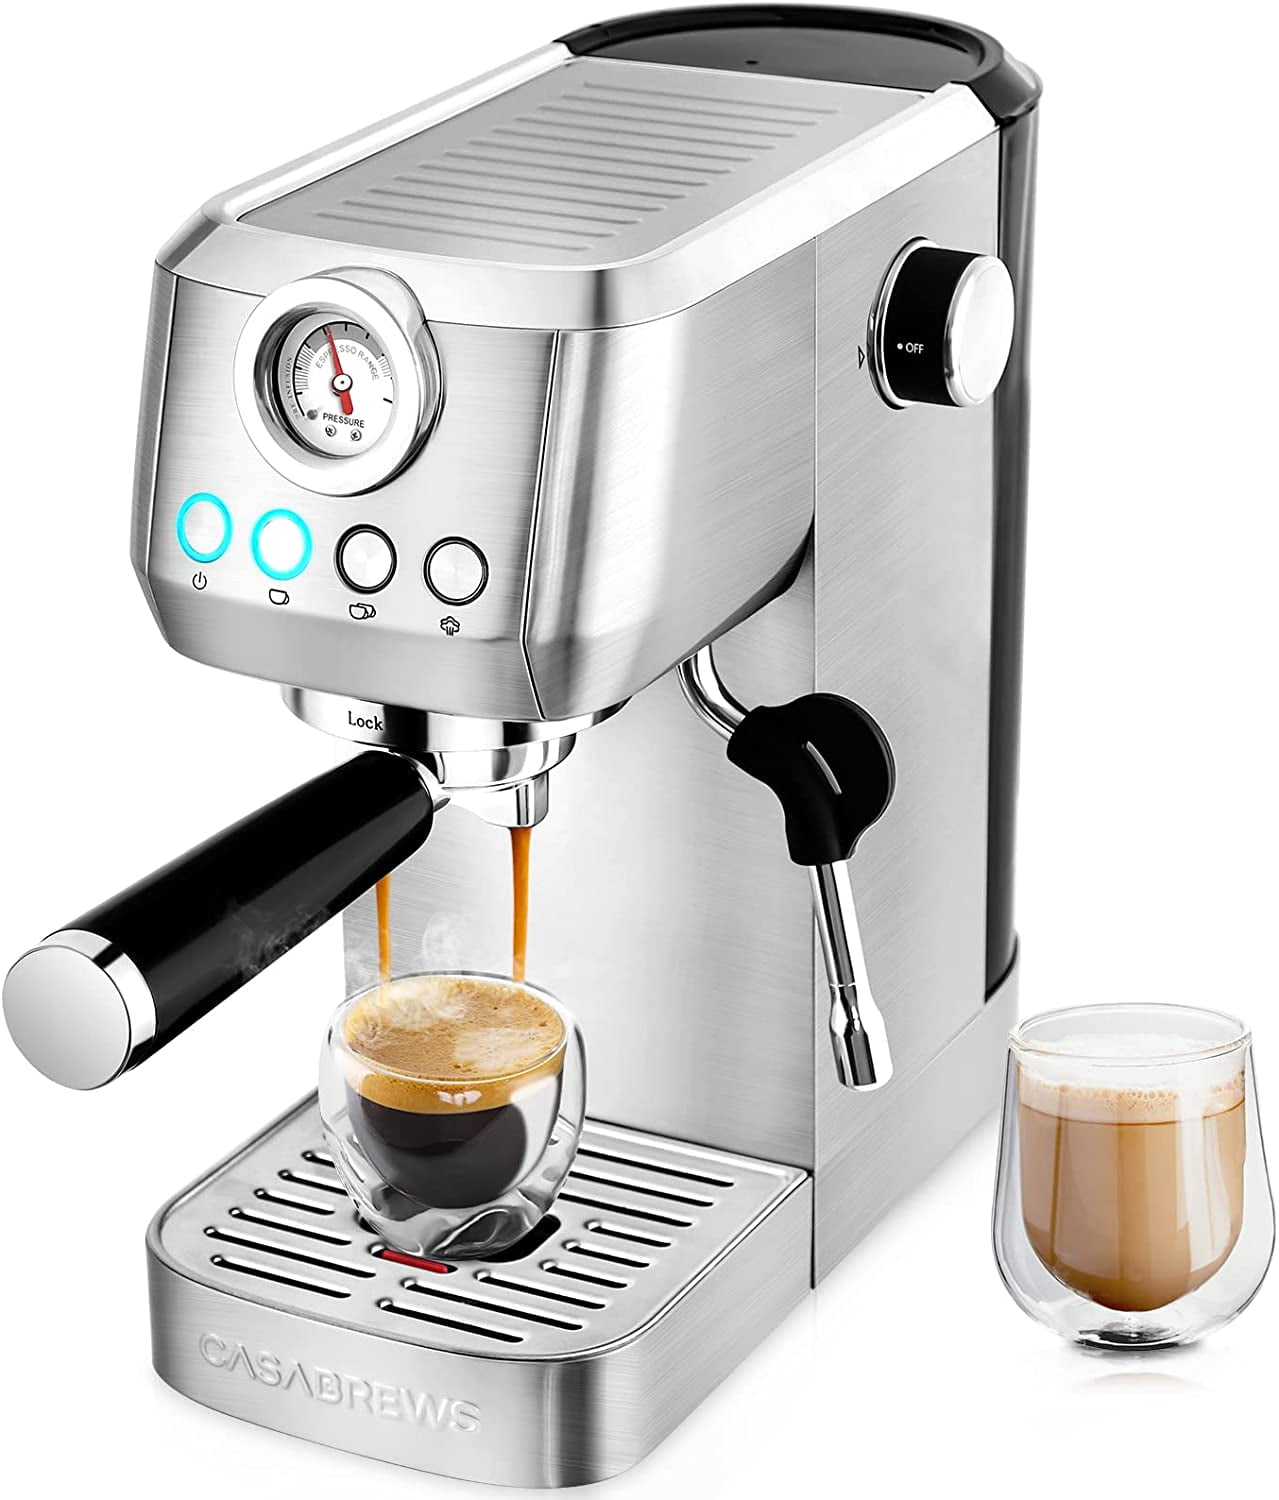 Casabrews Machine with Milk Frother Steam Wand, 20 Espresso Stainless Steel Professional Cappuccino and Latte Coffee Machine, New, Silver Walmart.com